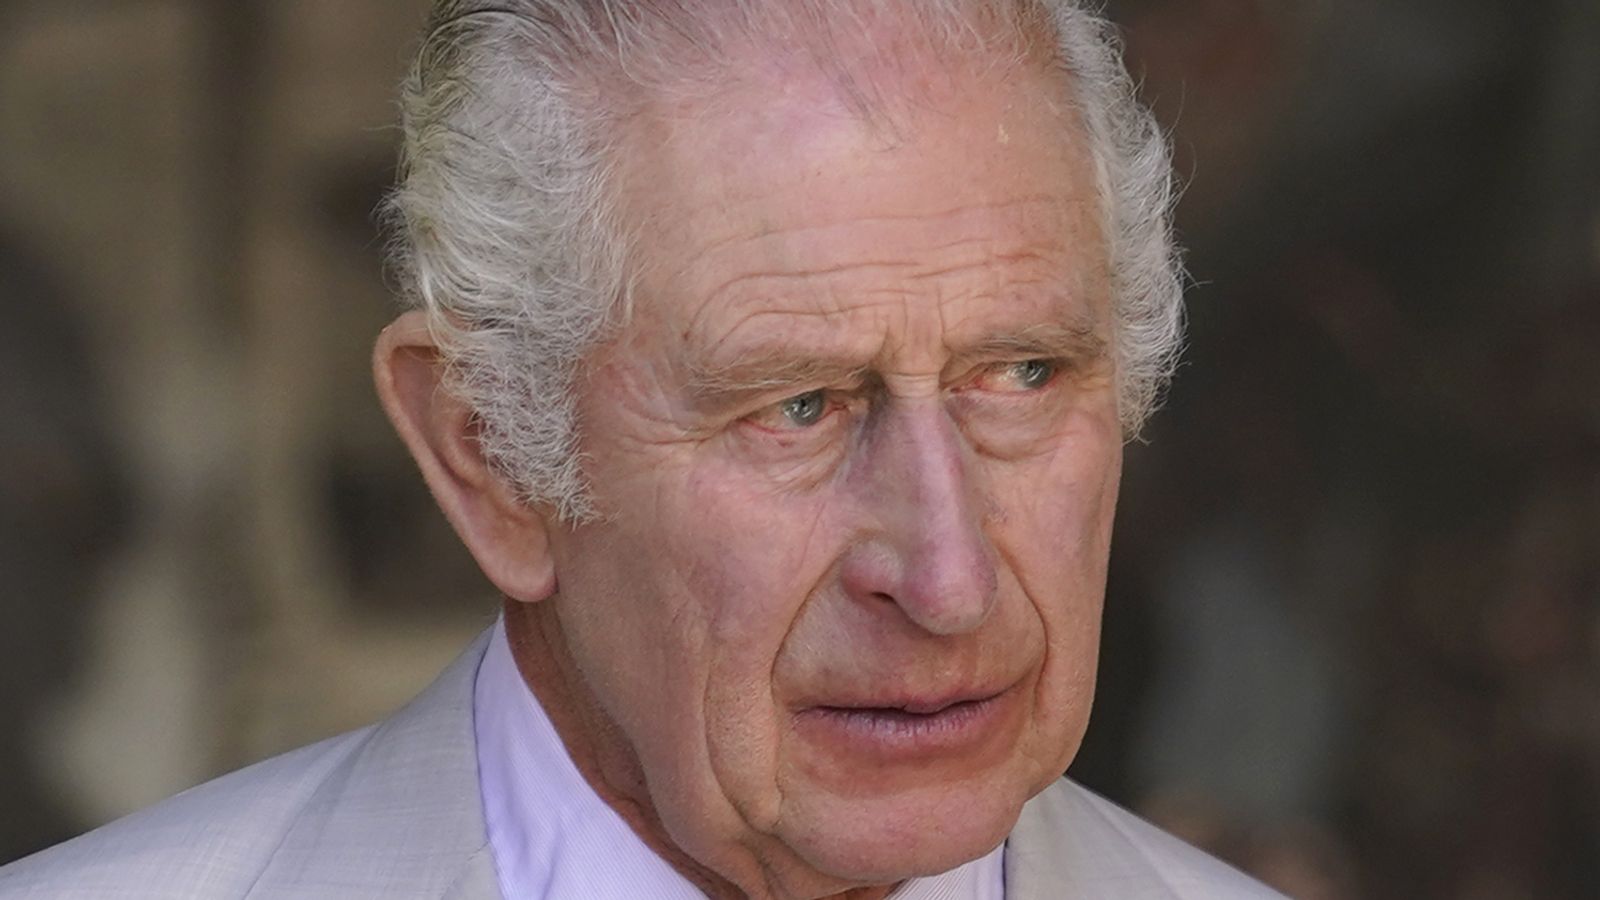 King will not carry out royal engagements for up to a month as he recovers from surgery, Sky News understands